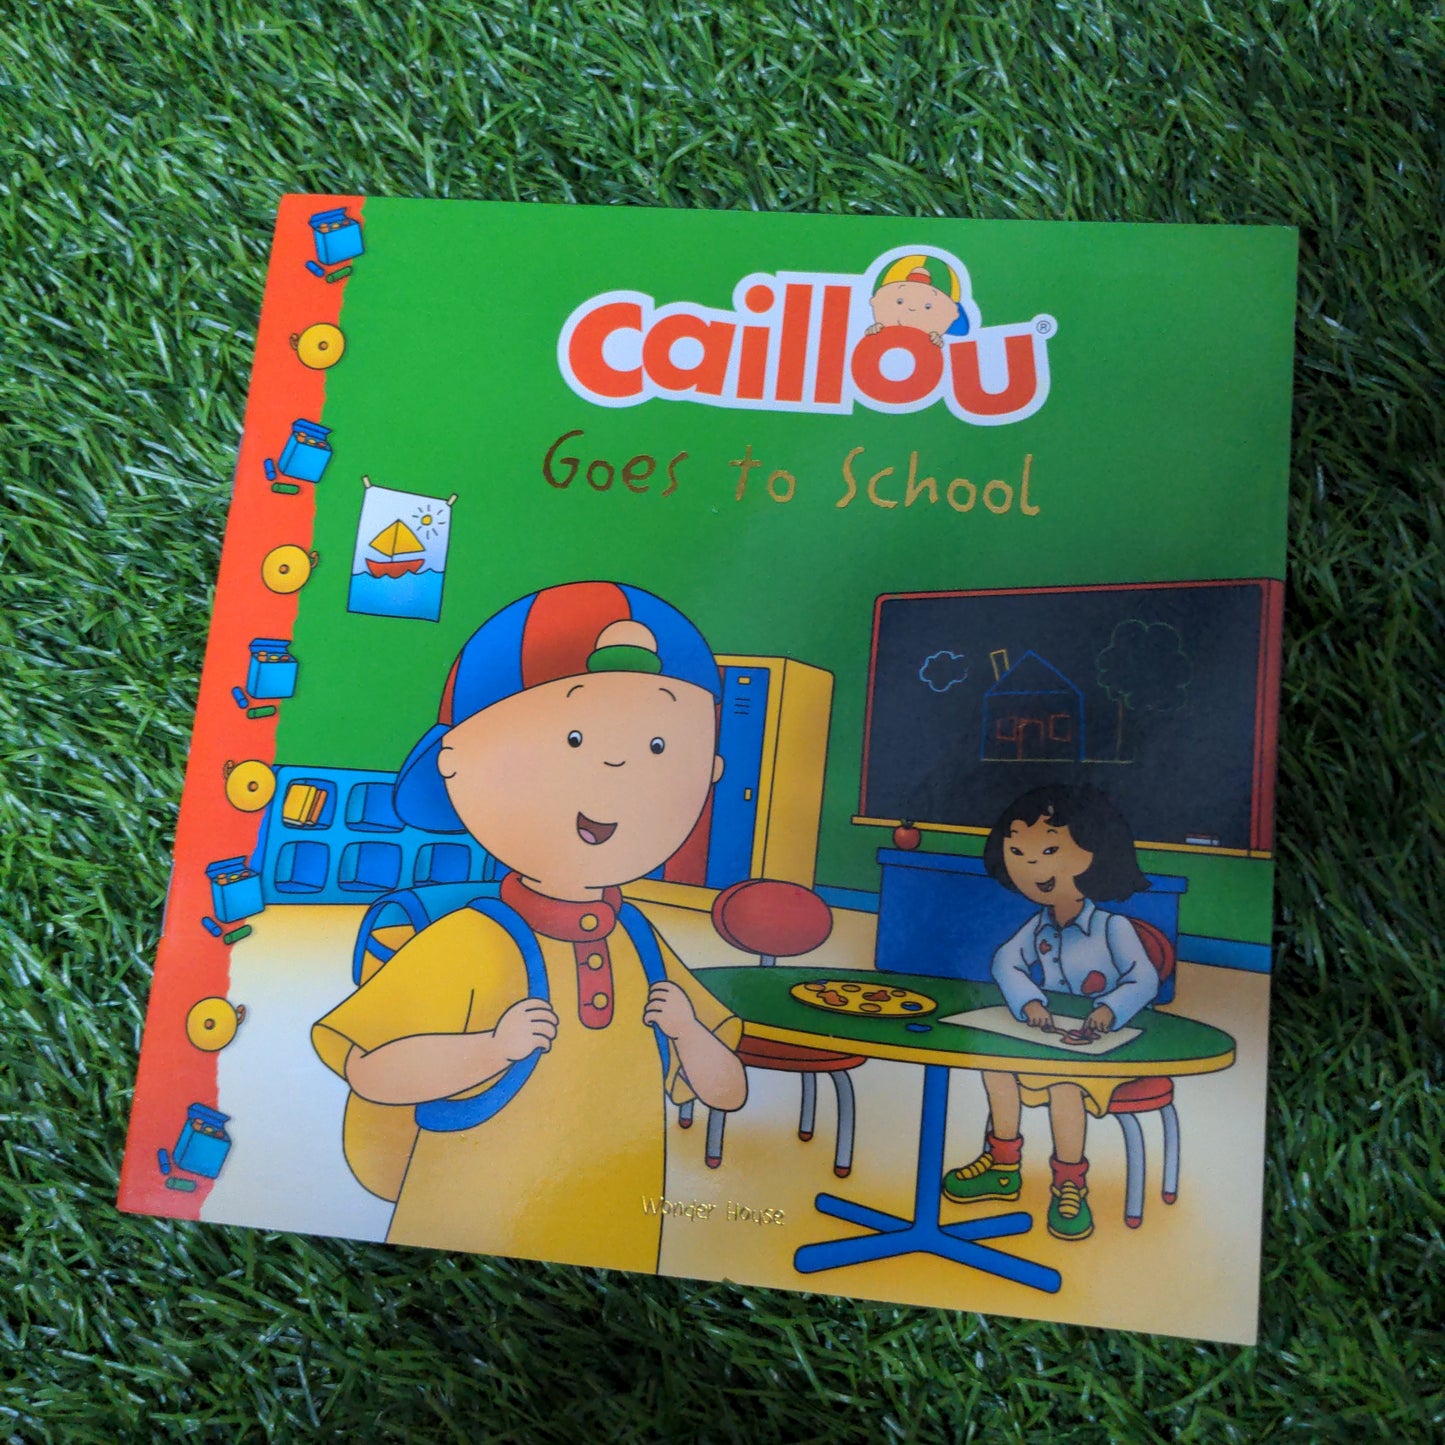 Caillou-Goes to School